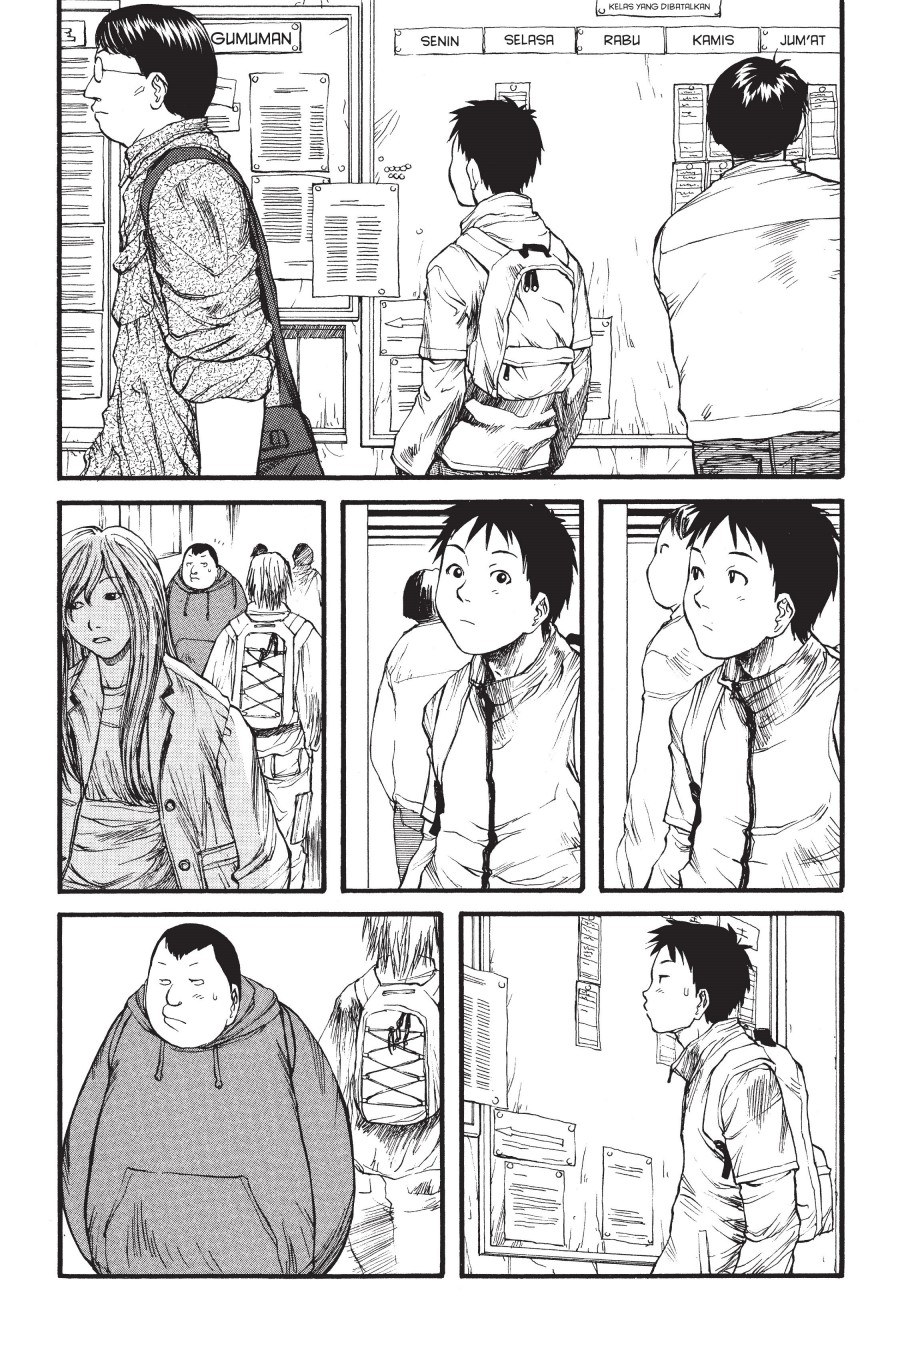 Genshiken – The Society for the Study of Modern Visual Culture Chapter 02 Image 1